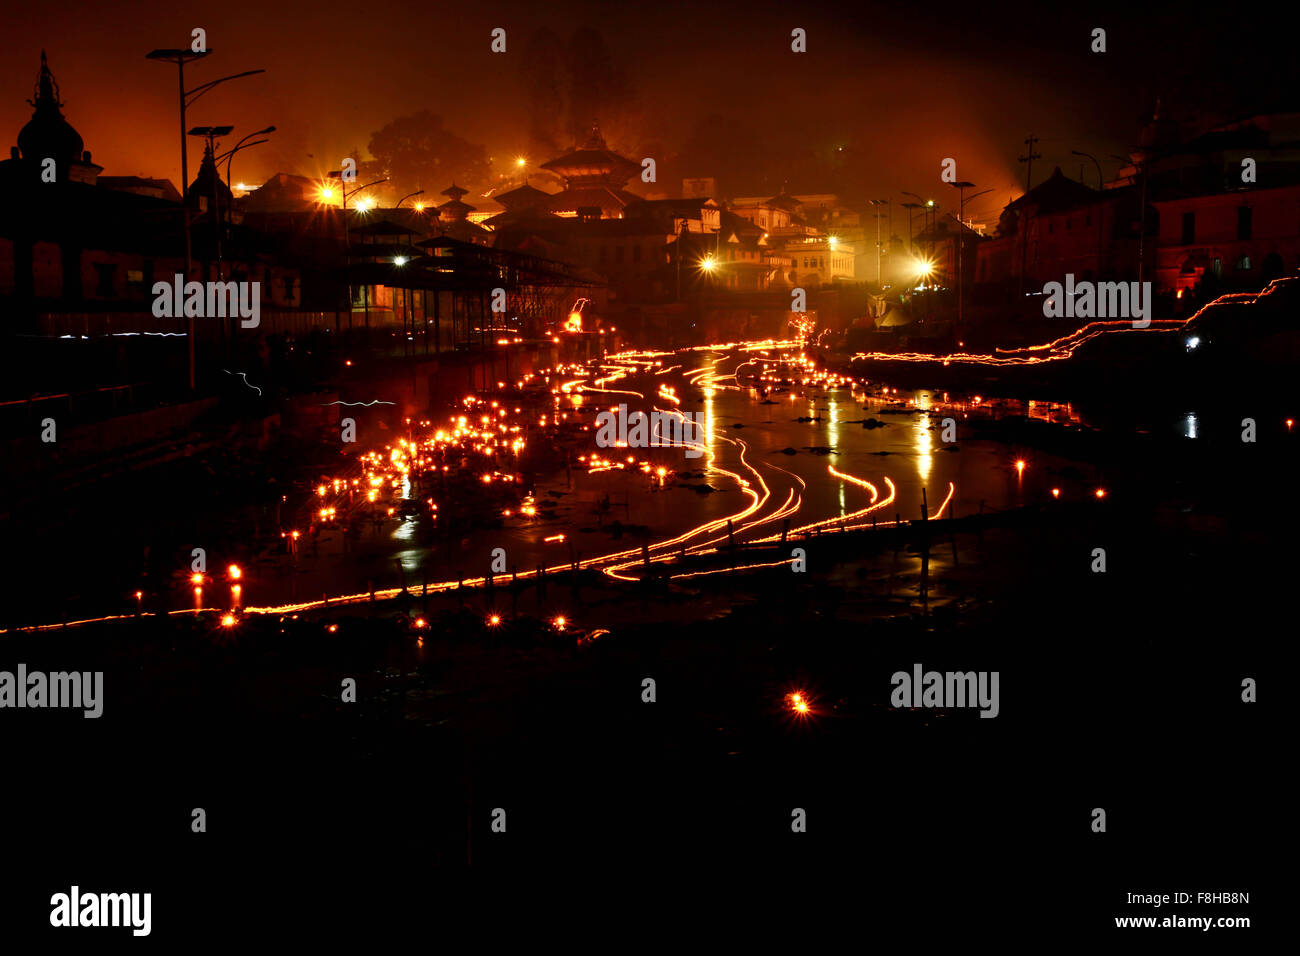 Kathmandu, Nepal. 10th Dec, 2015. Photo captured in long exposure shows oil lamp on the Bagmati river during the Bala Chaturdashi Festival in Kathmandu, Nepal, Dec. 10, 2015. On this day, worshippers scatter seven types of grain known as 'Sat biu' honouring the departed along a route at Pashupatinath temple. © Pratap Thapa/Xinhua/Alamy Live News Stock Photo